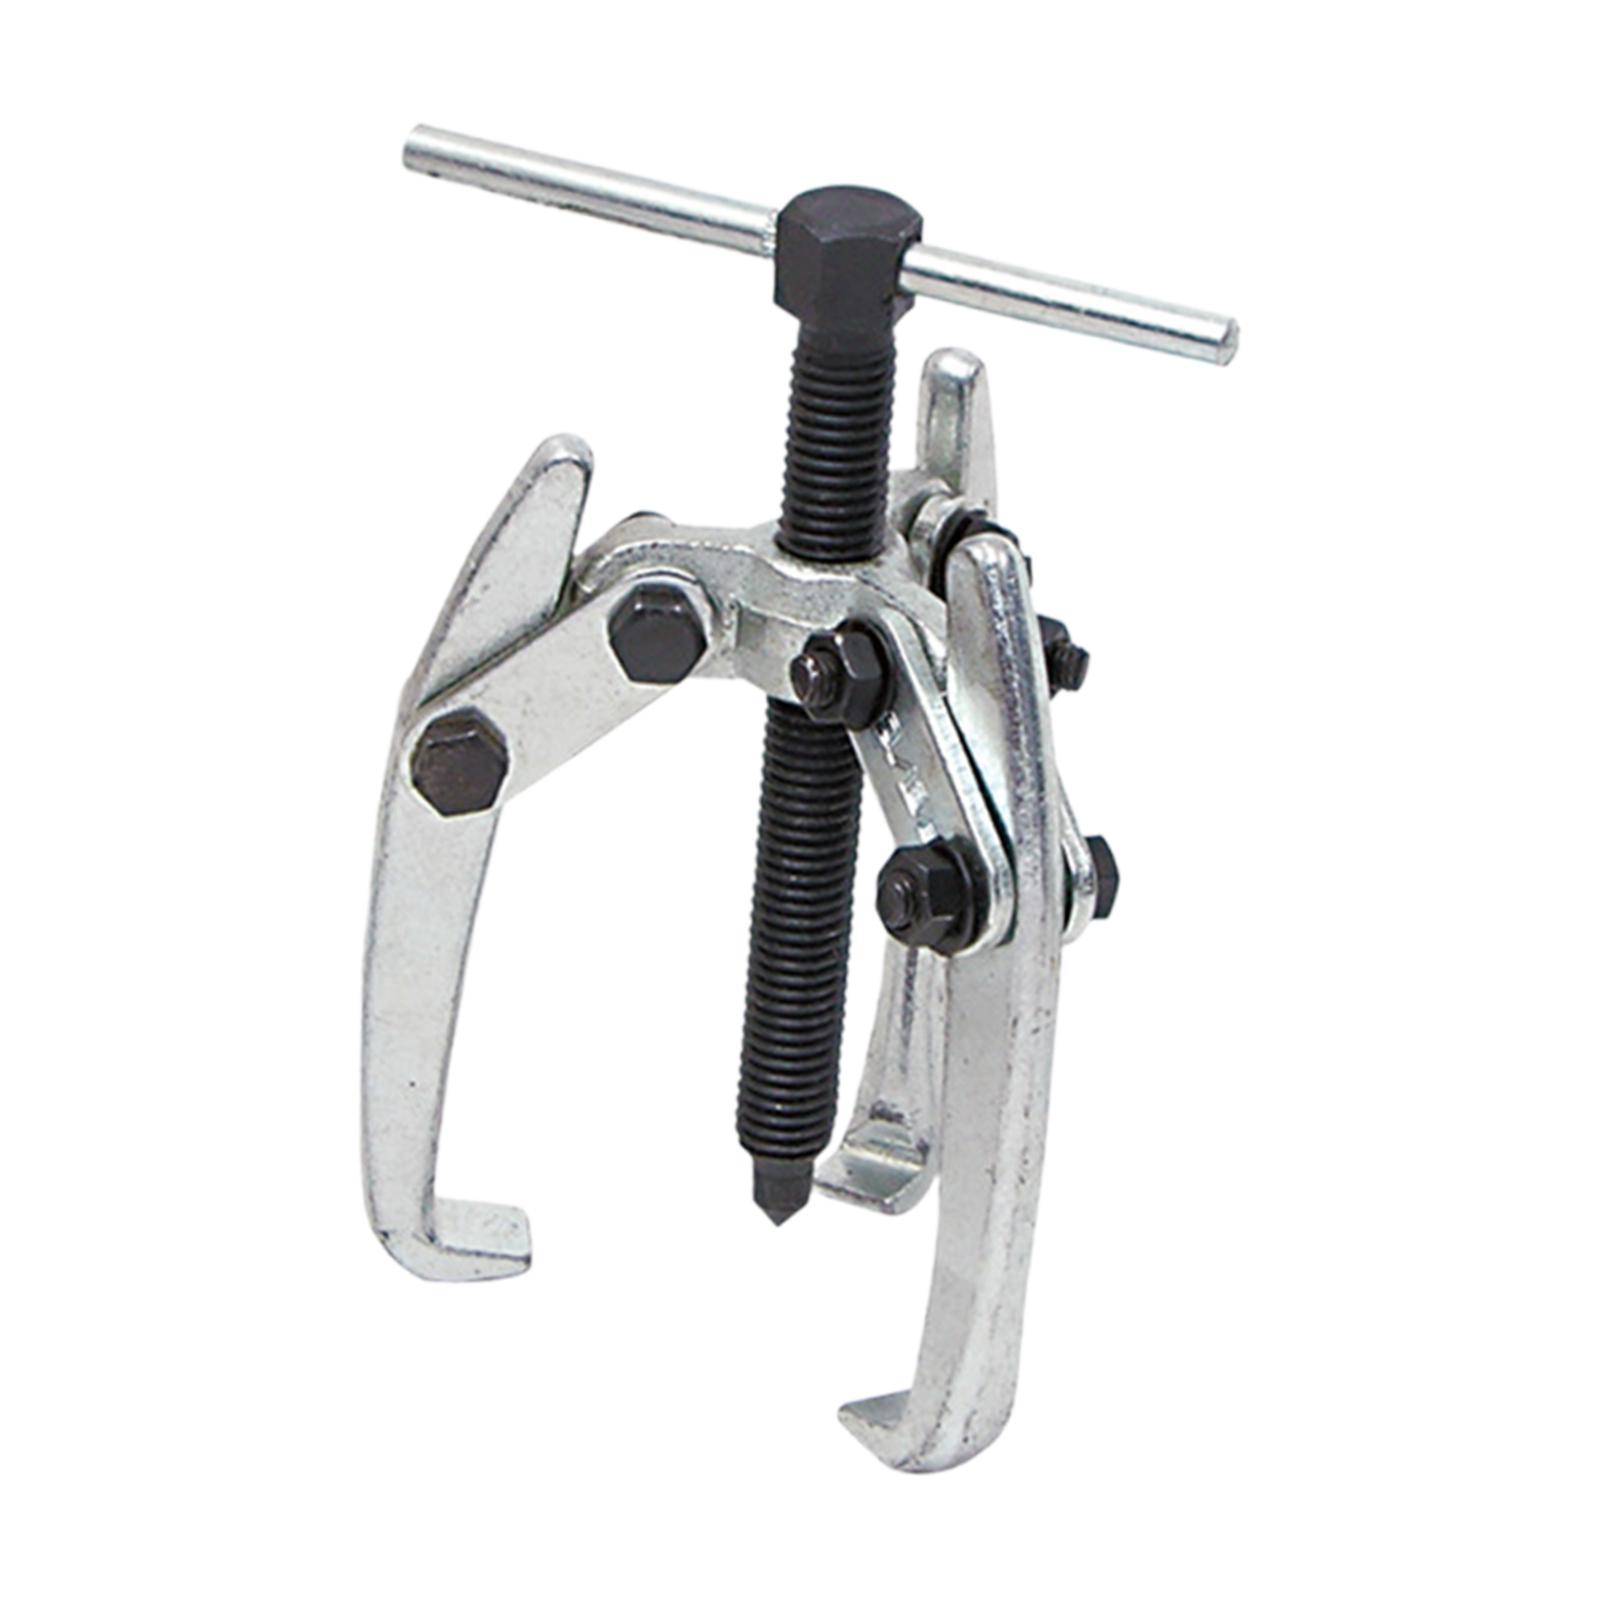 Bearing Gears Puller Jaw Puller Professional Accessories Pump Pulley Remover 3 Jaws 10 to 80mm